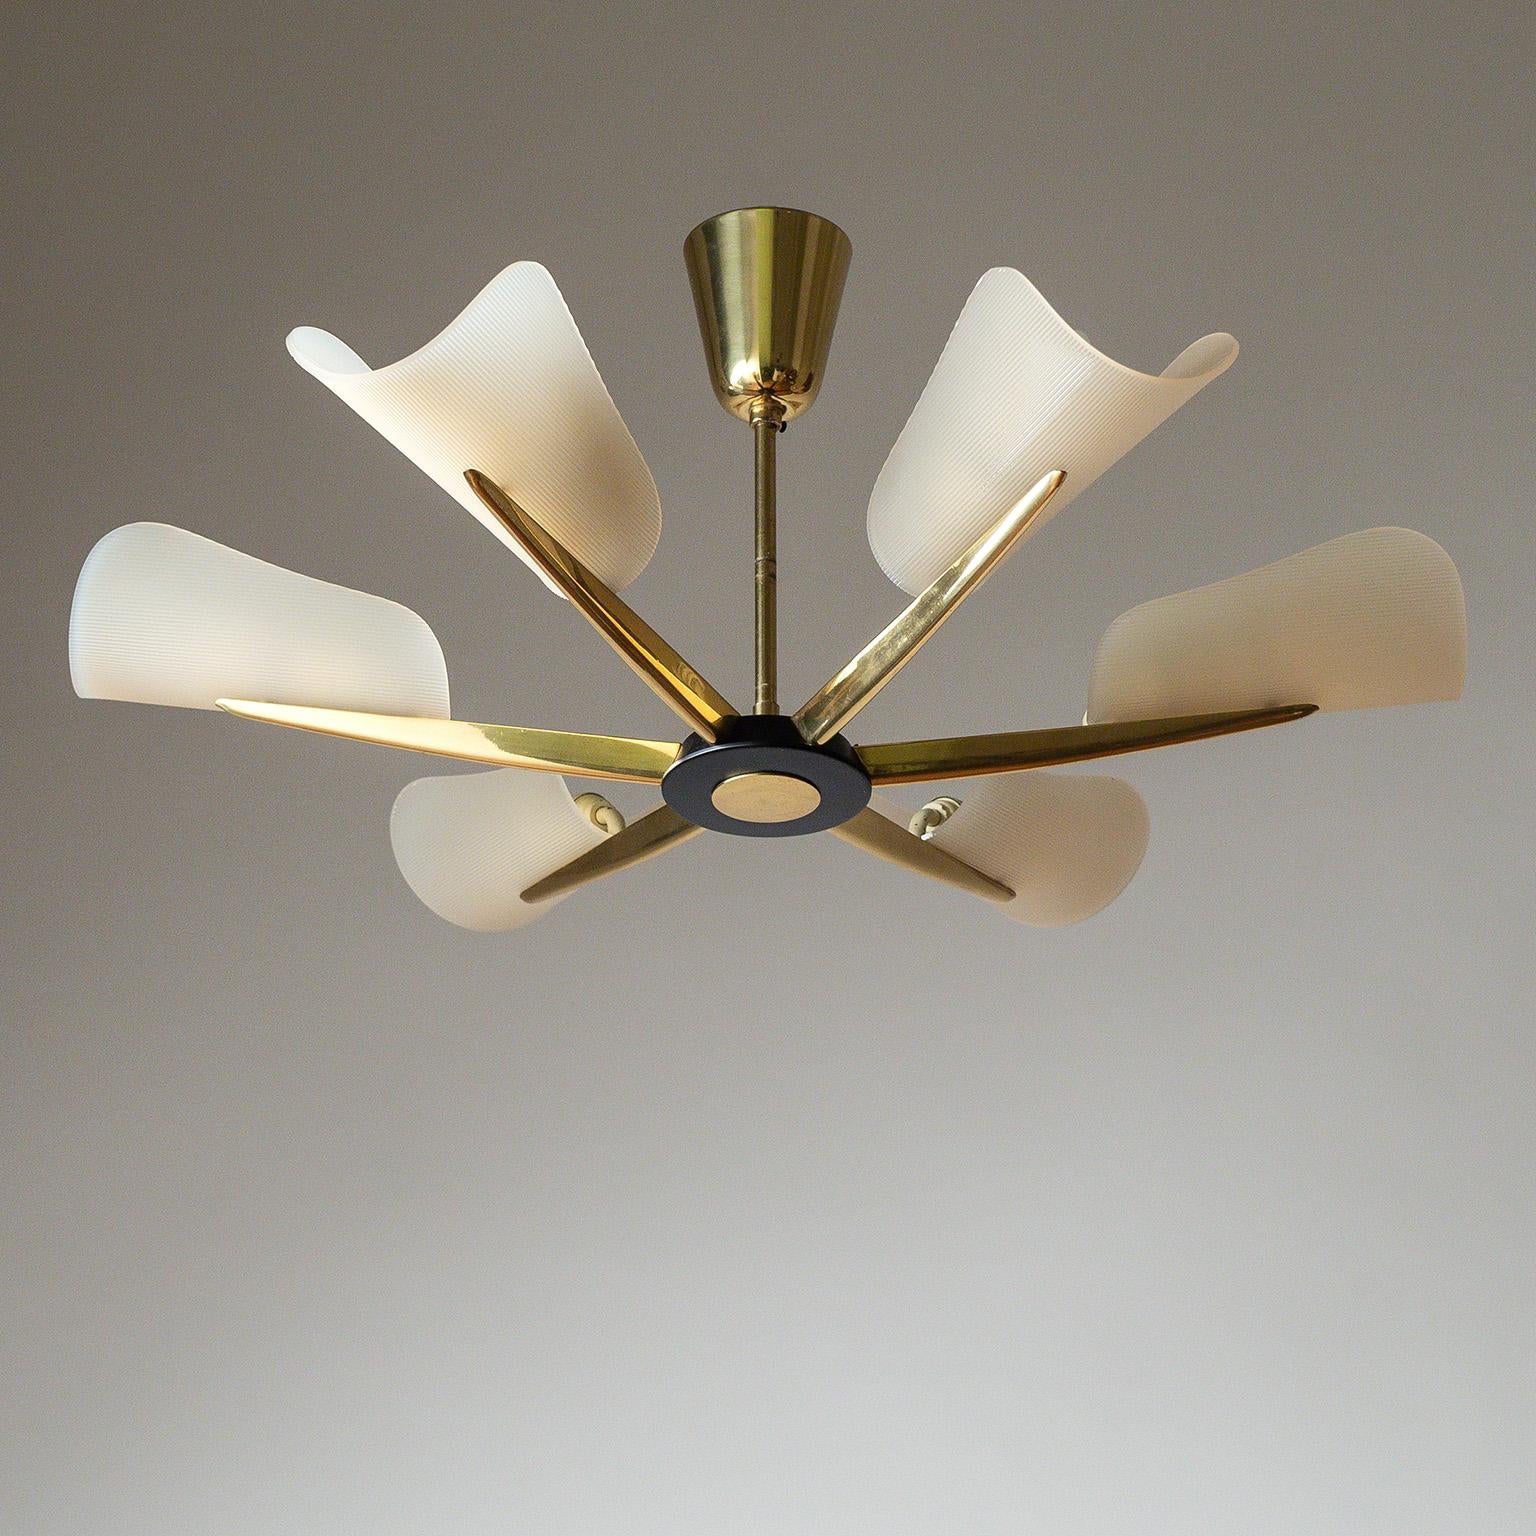 Classic six-arm brass ceiling light from the 1960s. Sunburst polished brass design with ribbed acrylic shades that have an ivory-color tint. Very nice original condition with a very light patina. Six original E14 sockets with new wiring.
Measures: